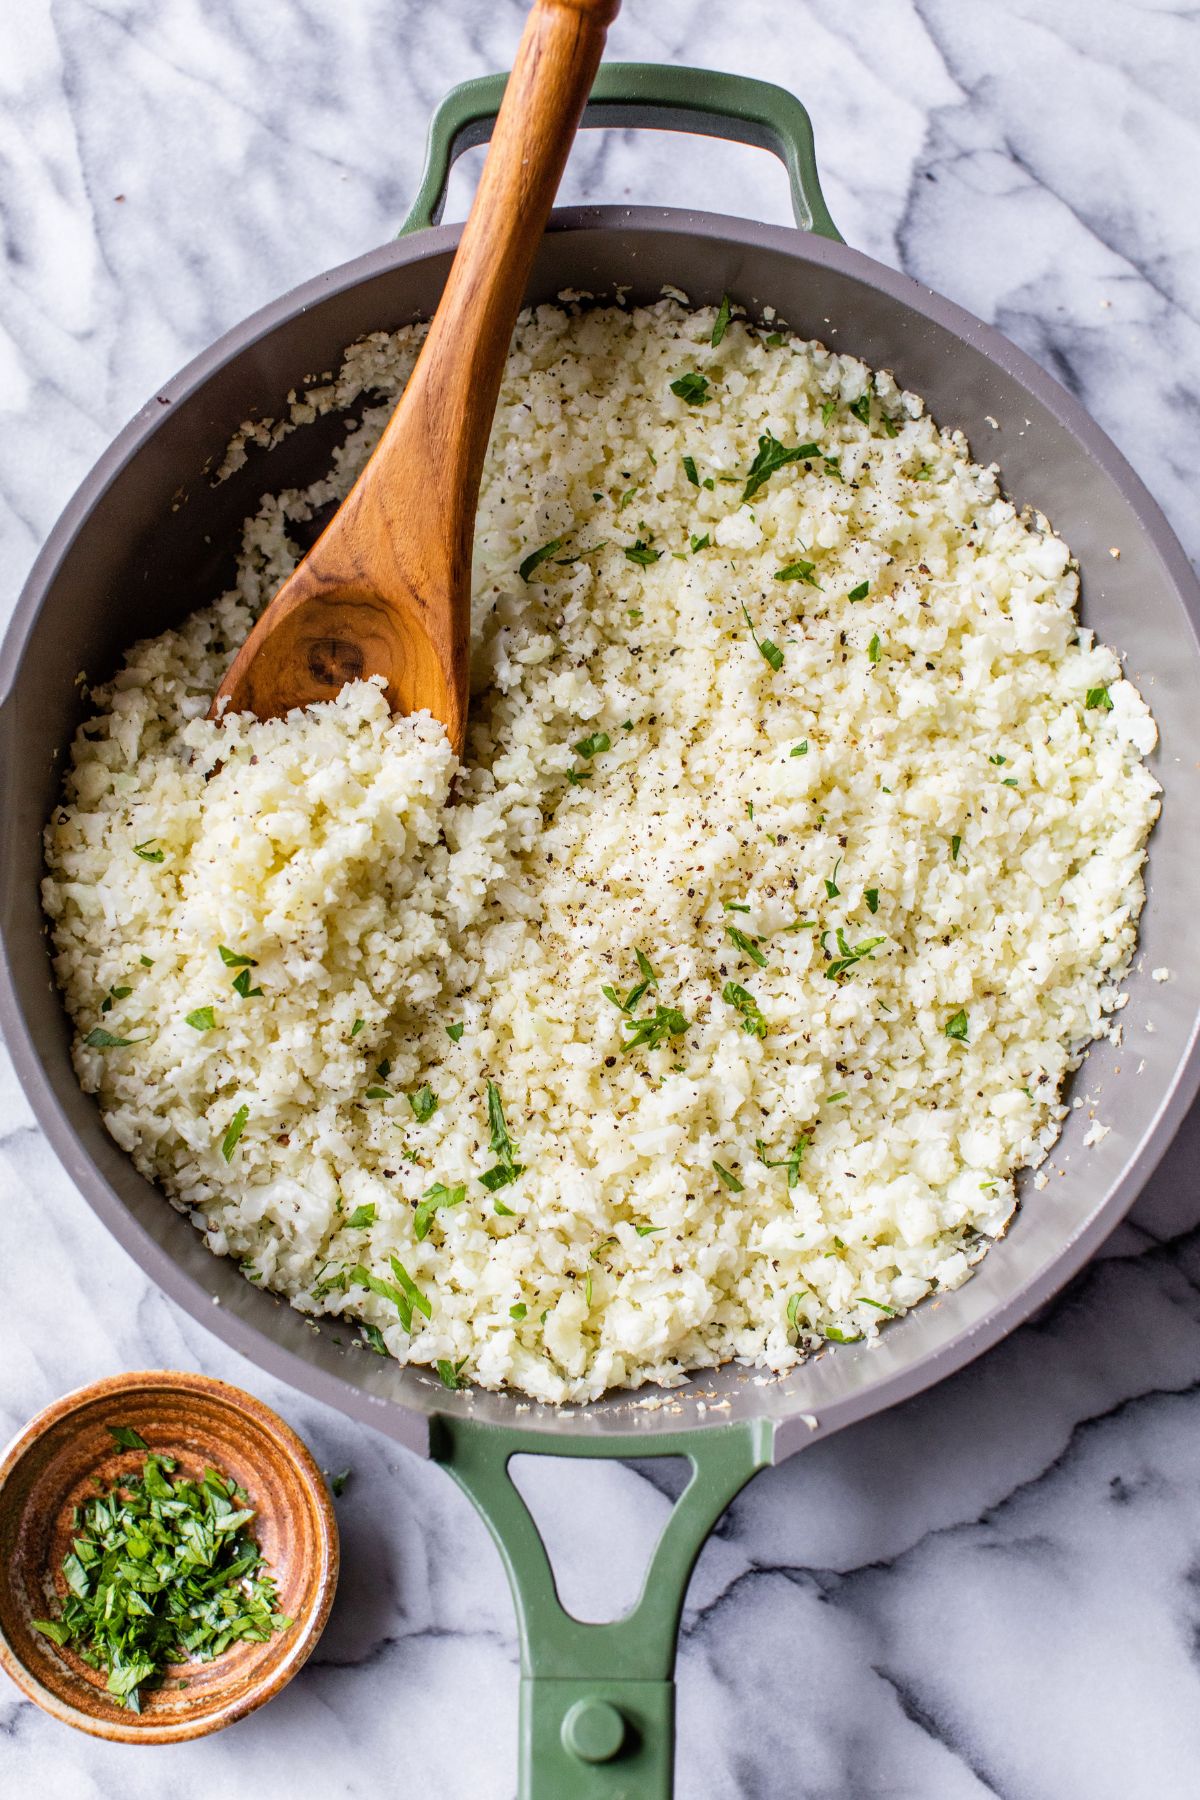 Cauliflower rice in a skillet with a wooden spoon.